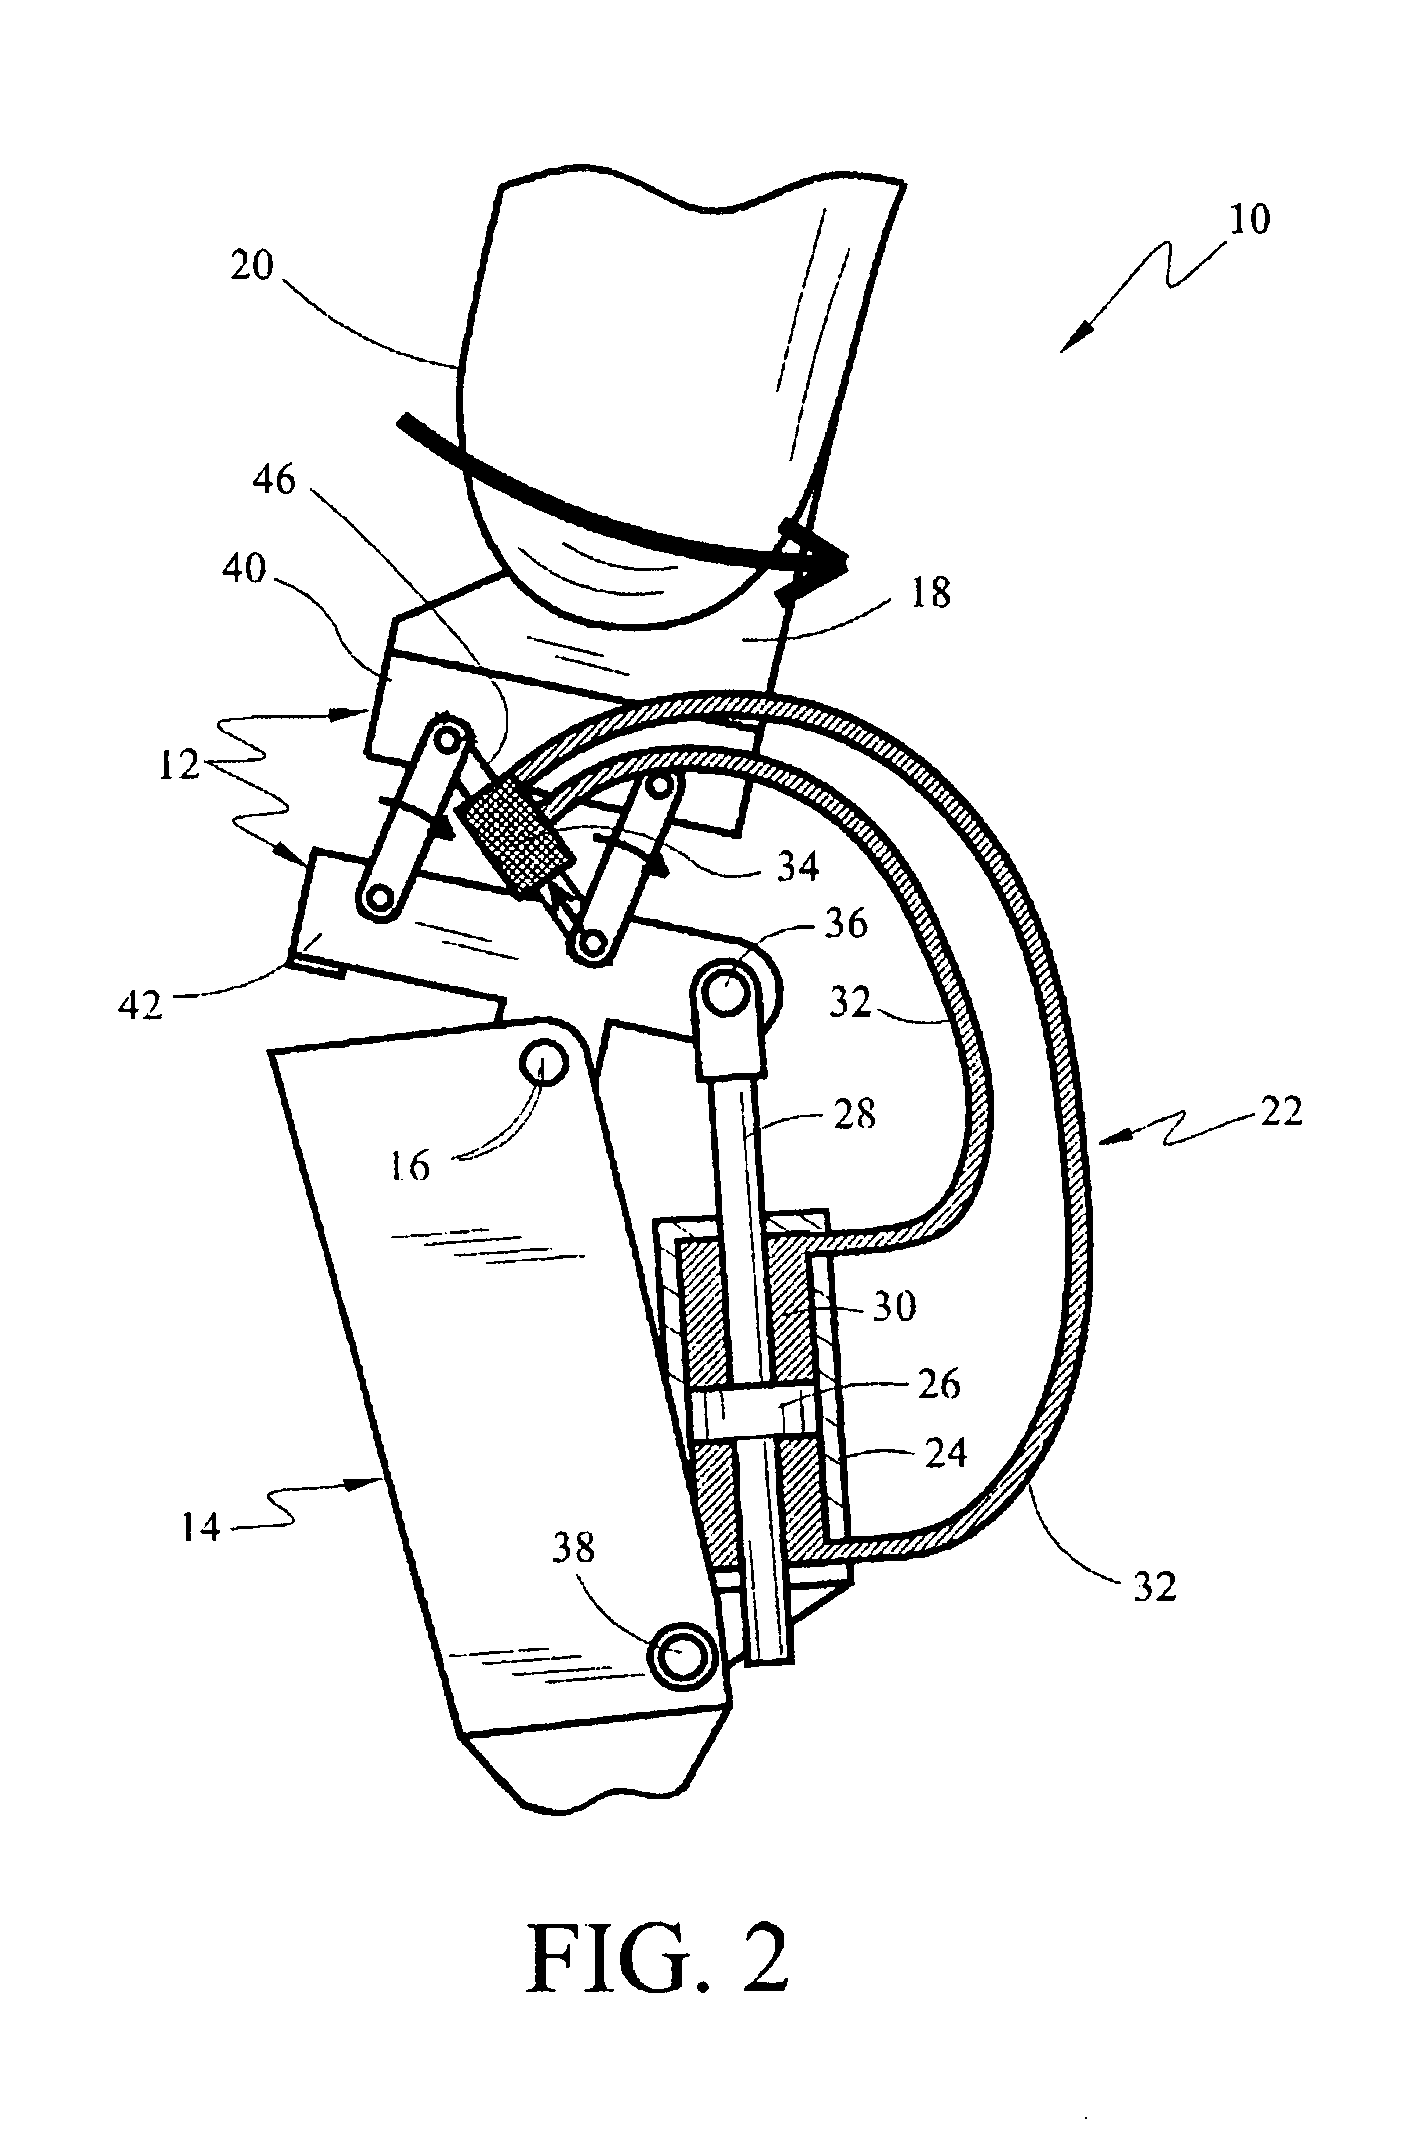 Above-knee prosthesis with variable resistance knee joint